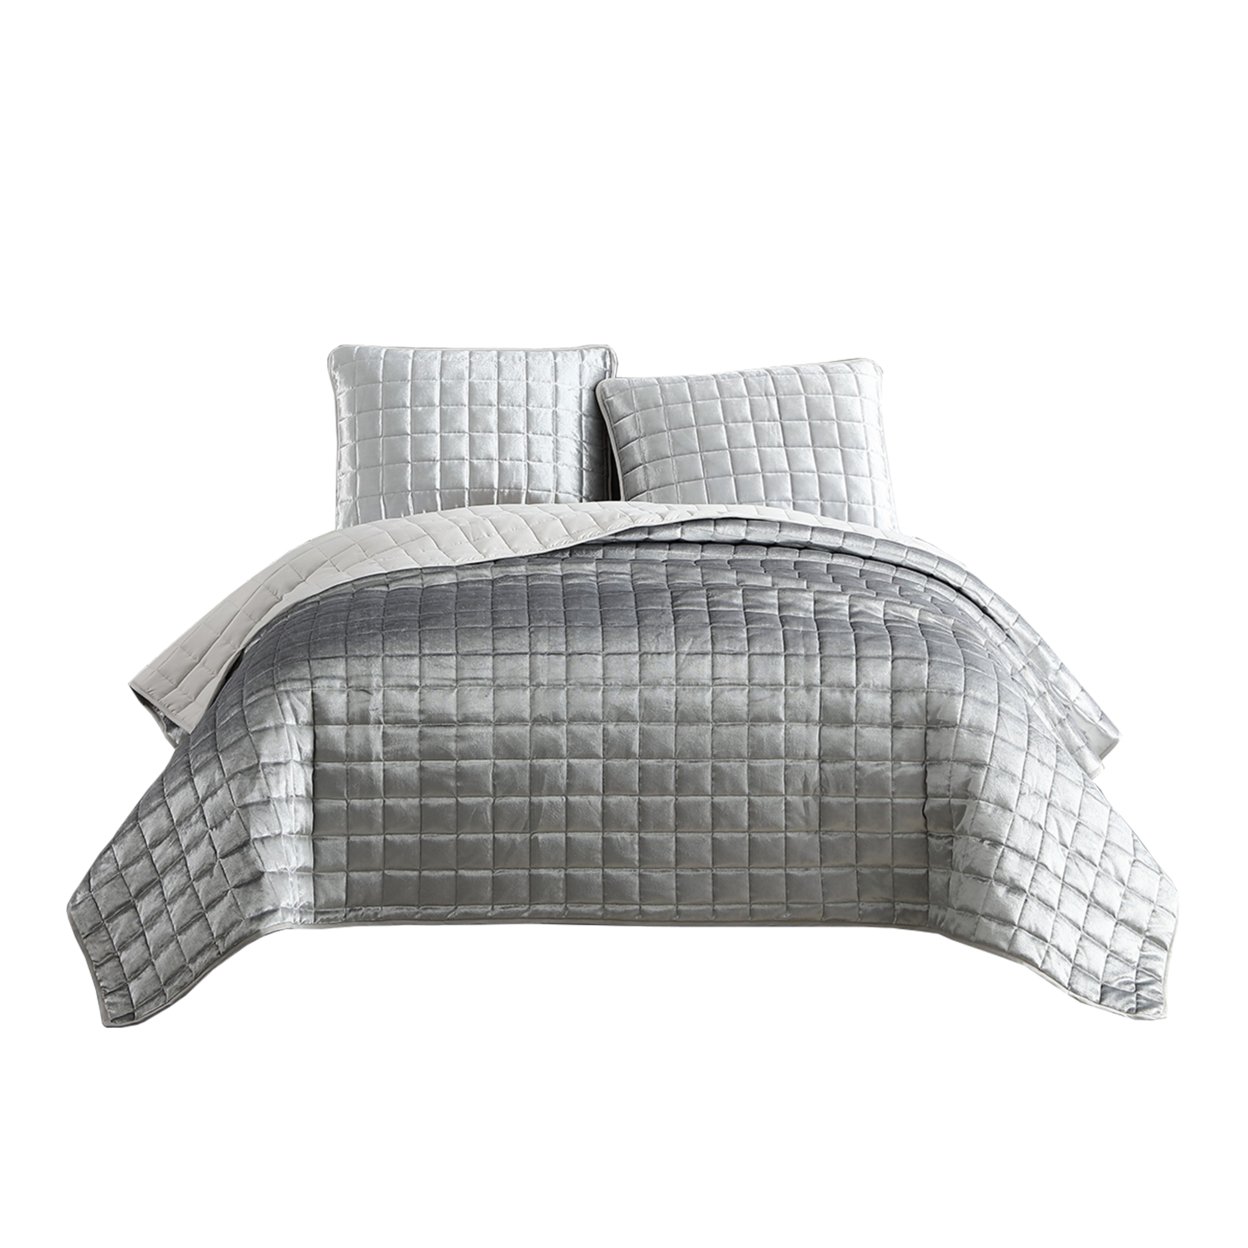 3 Piece King Size Coverlet Set With Stitched Square Pattern, Silver- Saltoro Sherpi